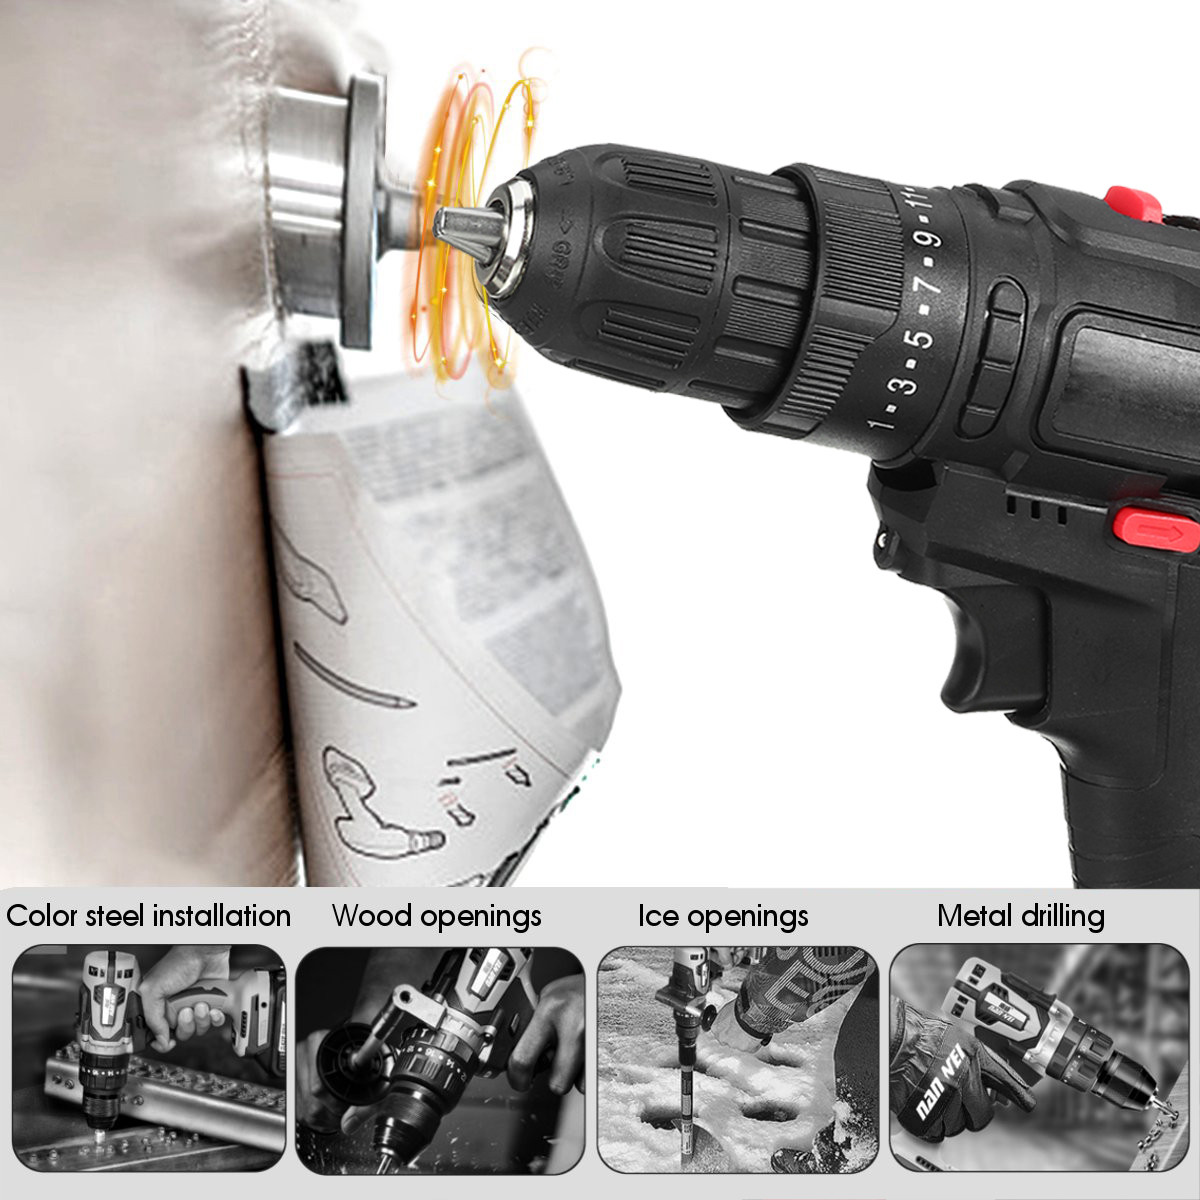 36V-Cordless-Electric-Impact-Hammer-LED-Light-Drill-Screwdriver-With-2-Battery-Household-Power-Tools-1779033-2